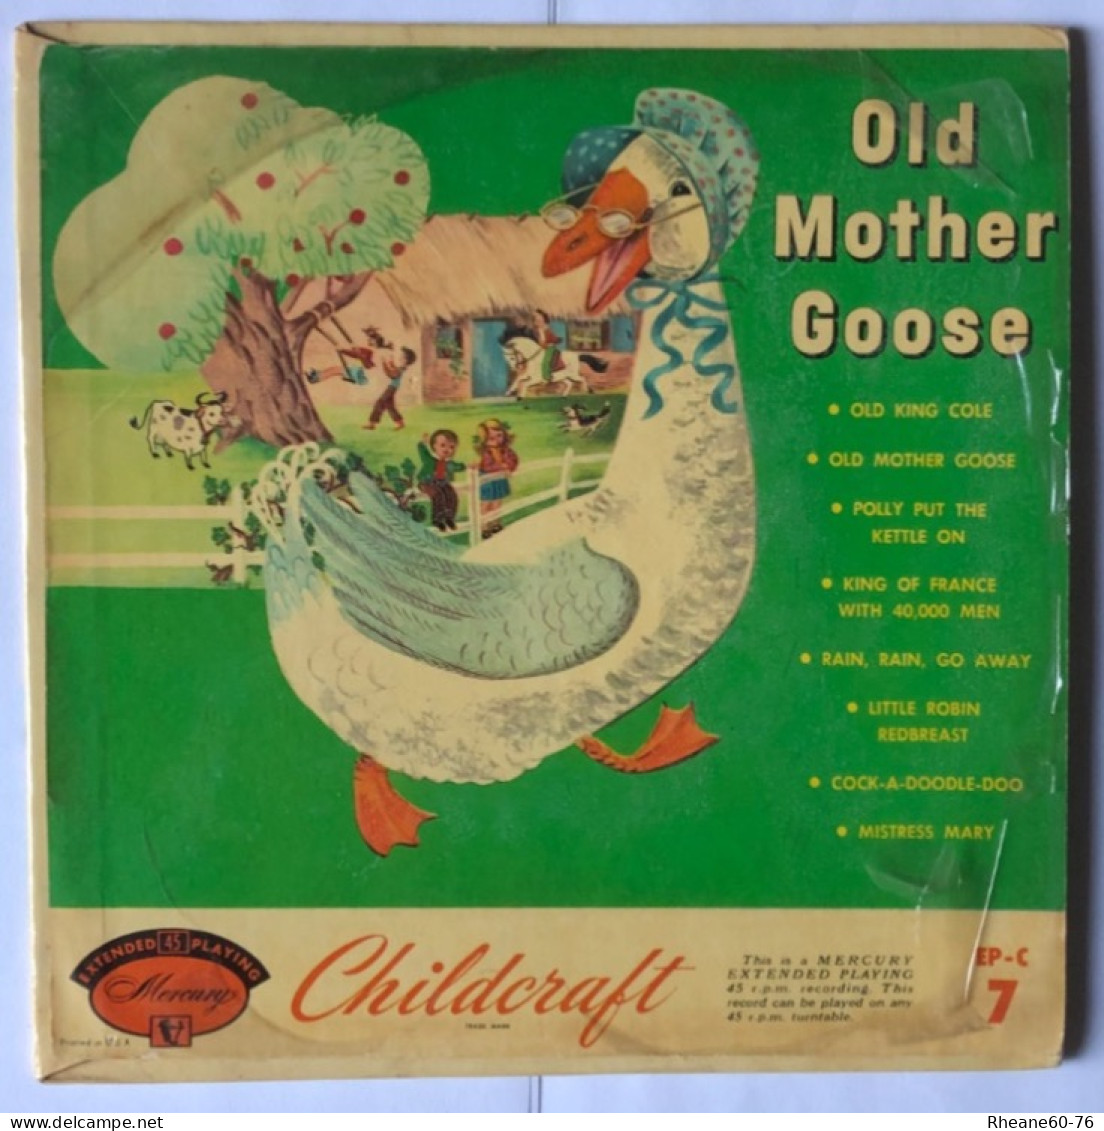 Mercury Childcraft 45T EP C7 - Old Mother Goose - Formati Speciali